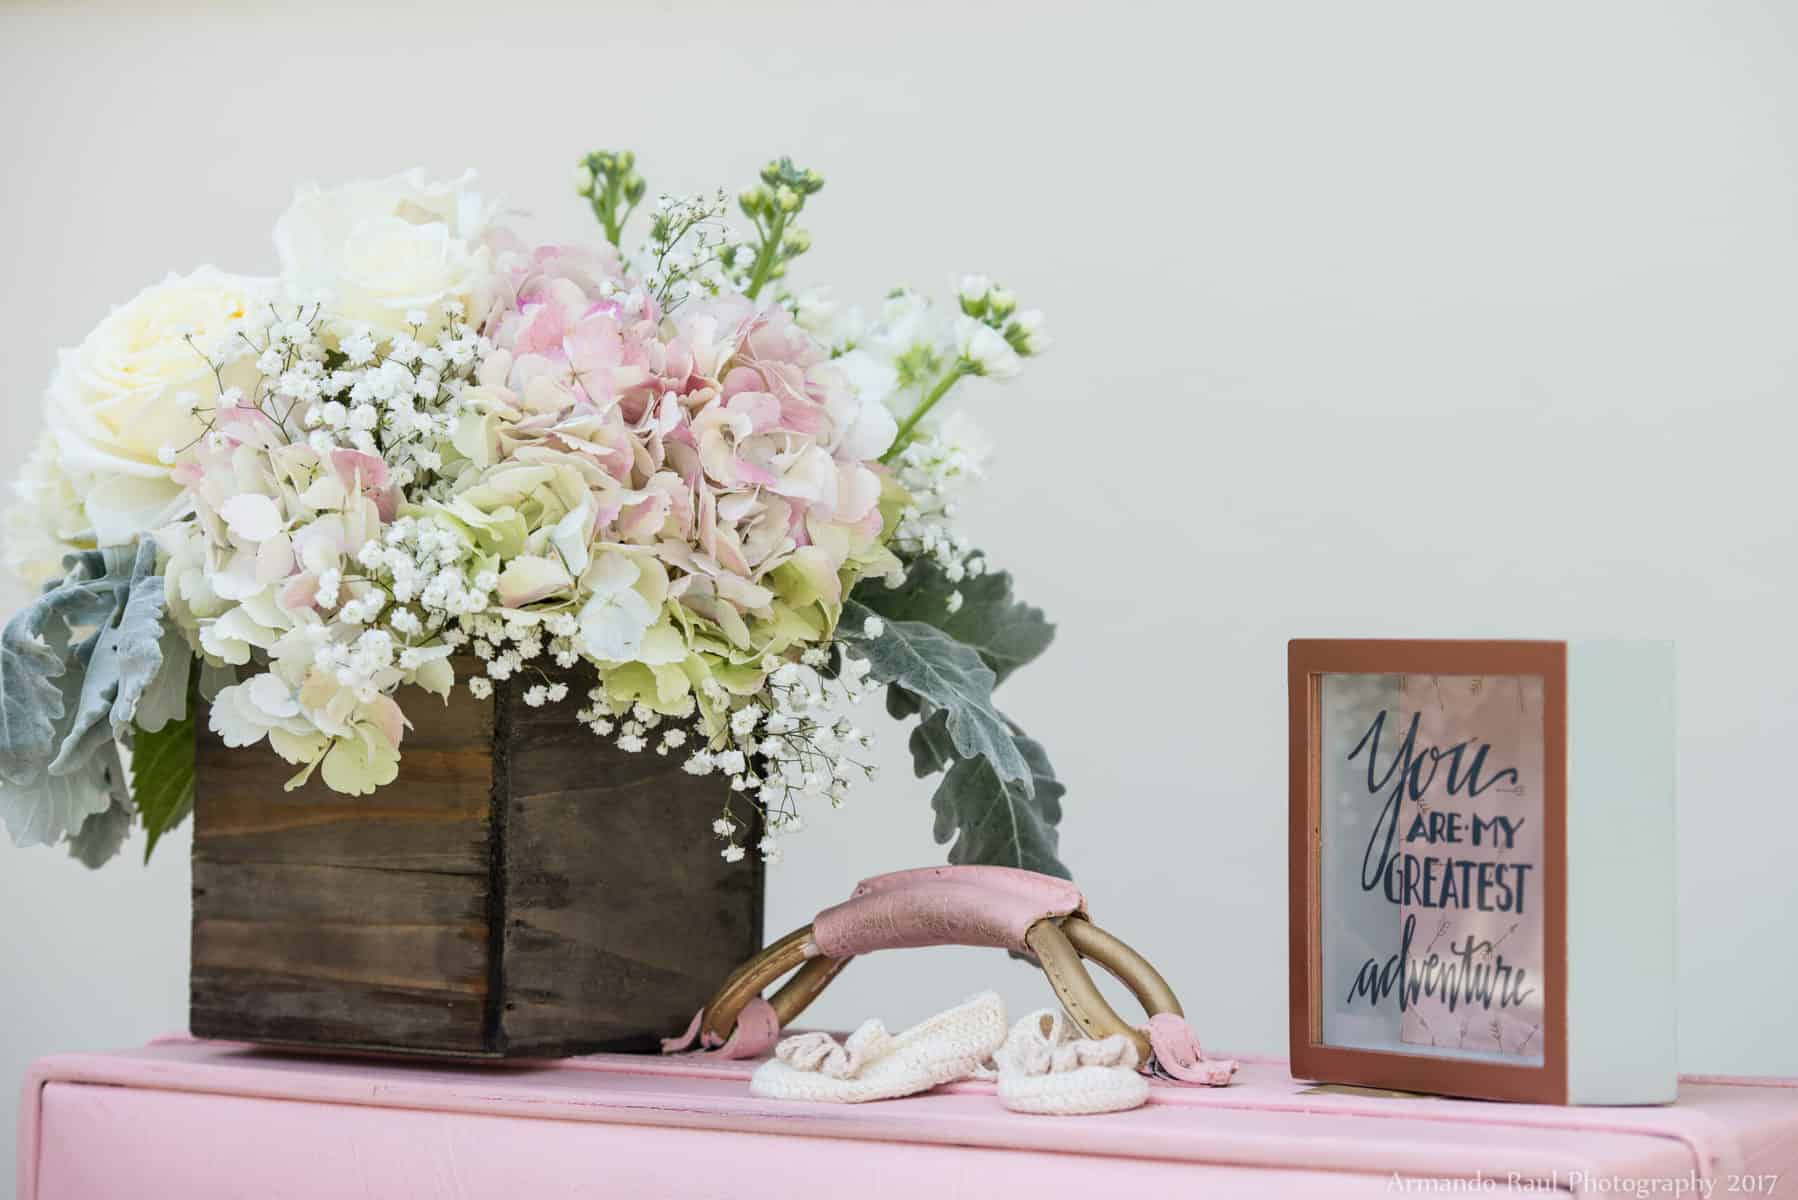 Vintage Travel Theme Baby Shower | Baby Girl | You Are My Greatest Adventure | Lace, World Map, Flowers, Cameras, Vintage Decor | Cake, Sweets, Desserts, Lounge Seating Area, World Cuisine, Food Stations, Seating Arrangement | Home Baby Shower | Blush Pink, Beige, Gold, Champagne, White